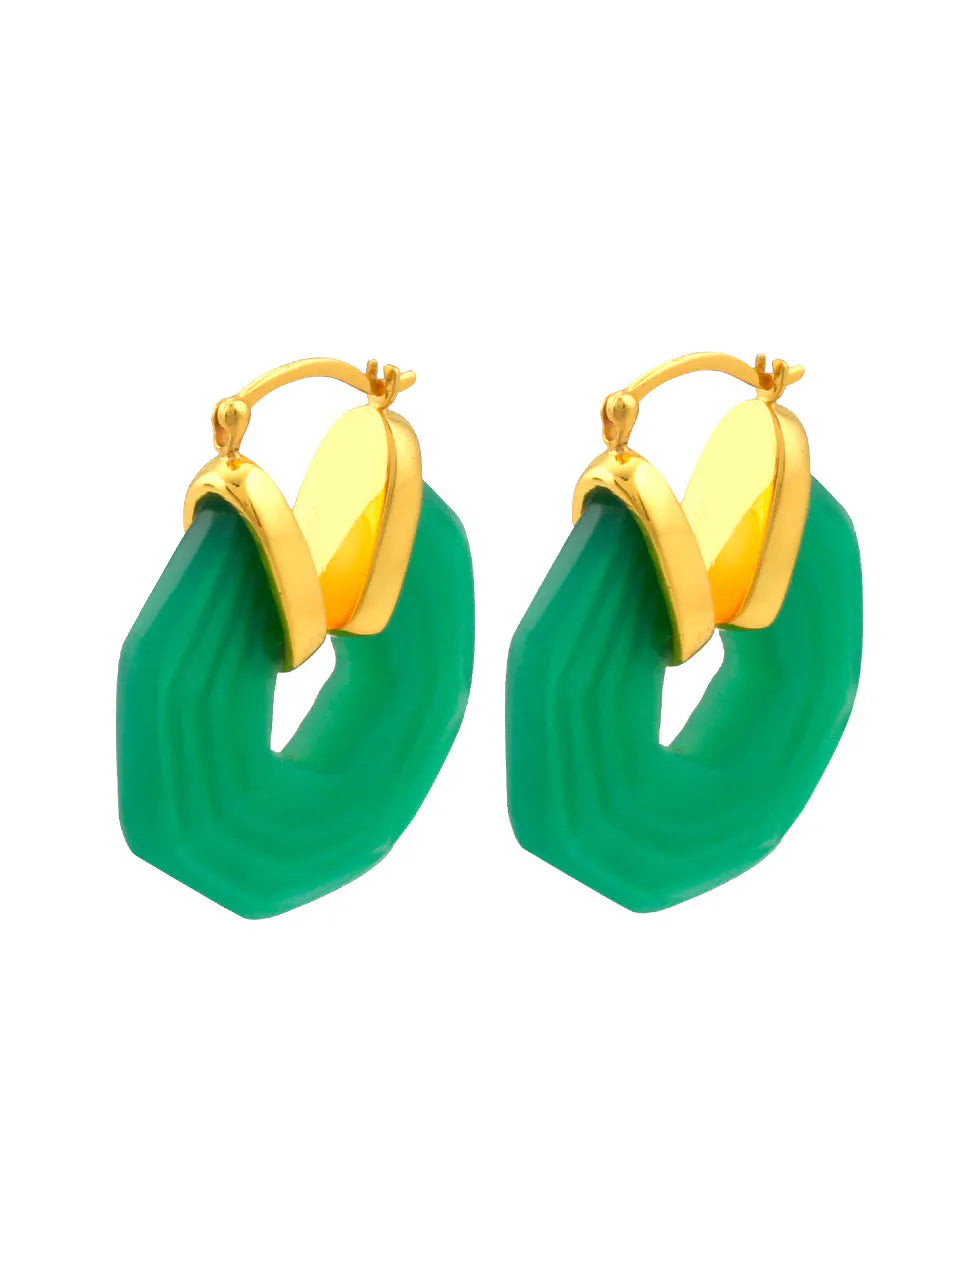 A pair of Shyla - Sphinx Earrings - Emerald, adorned with a touch of gold.